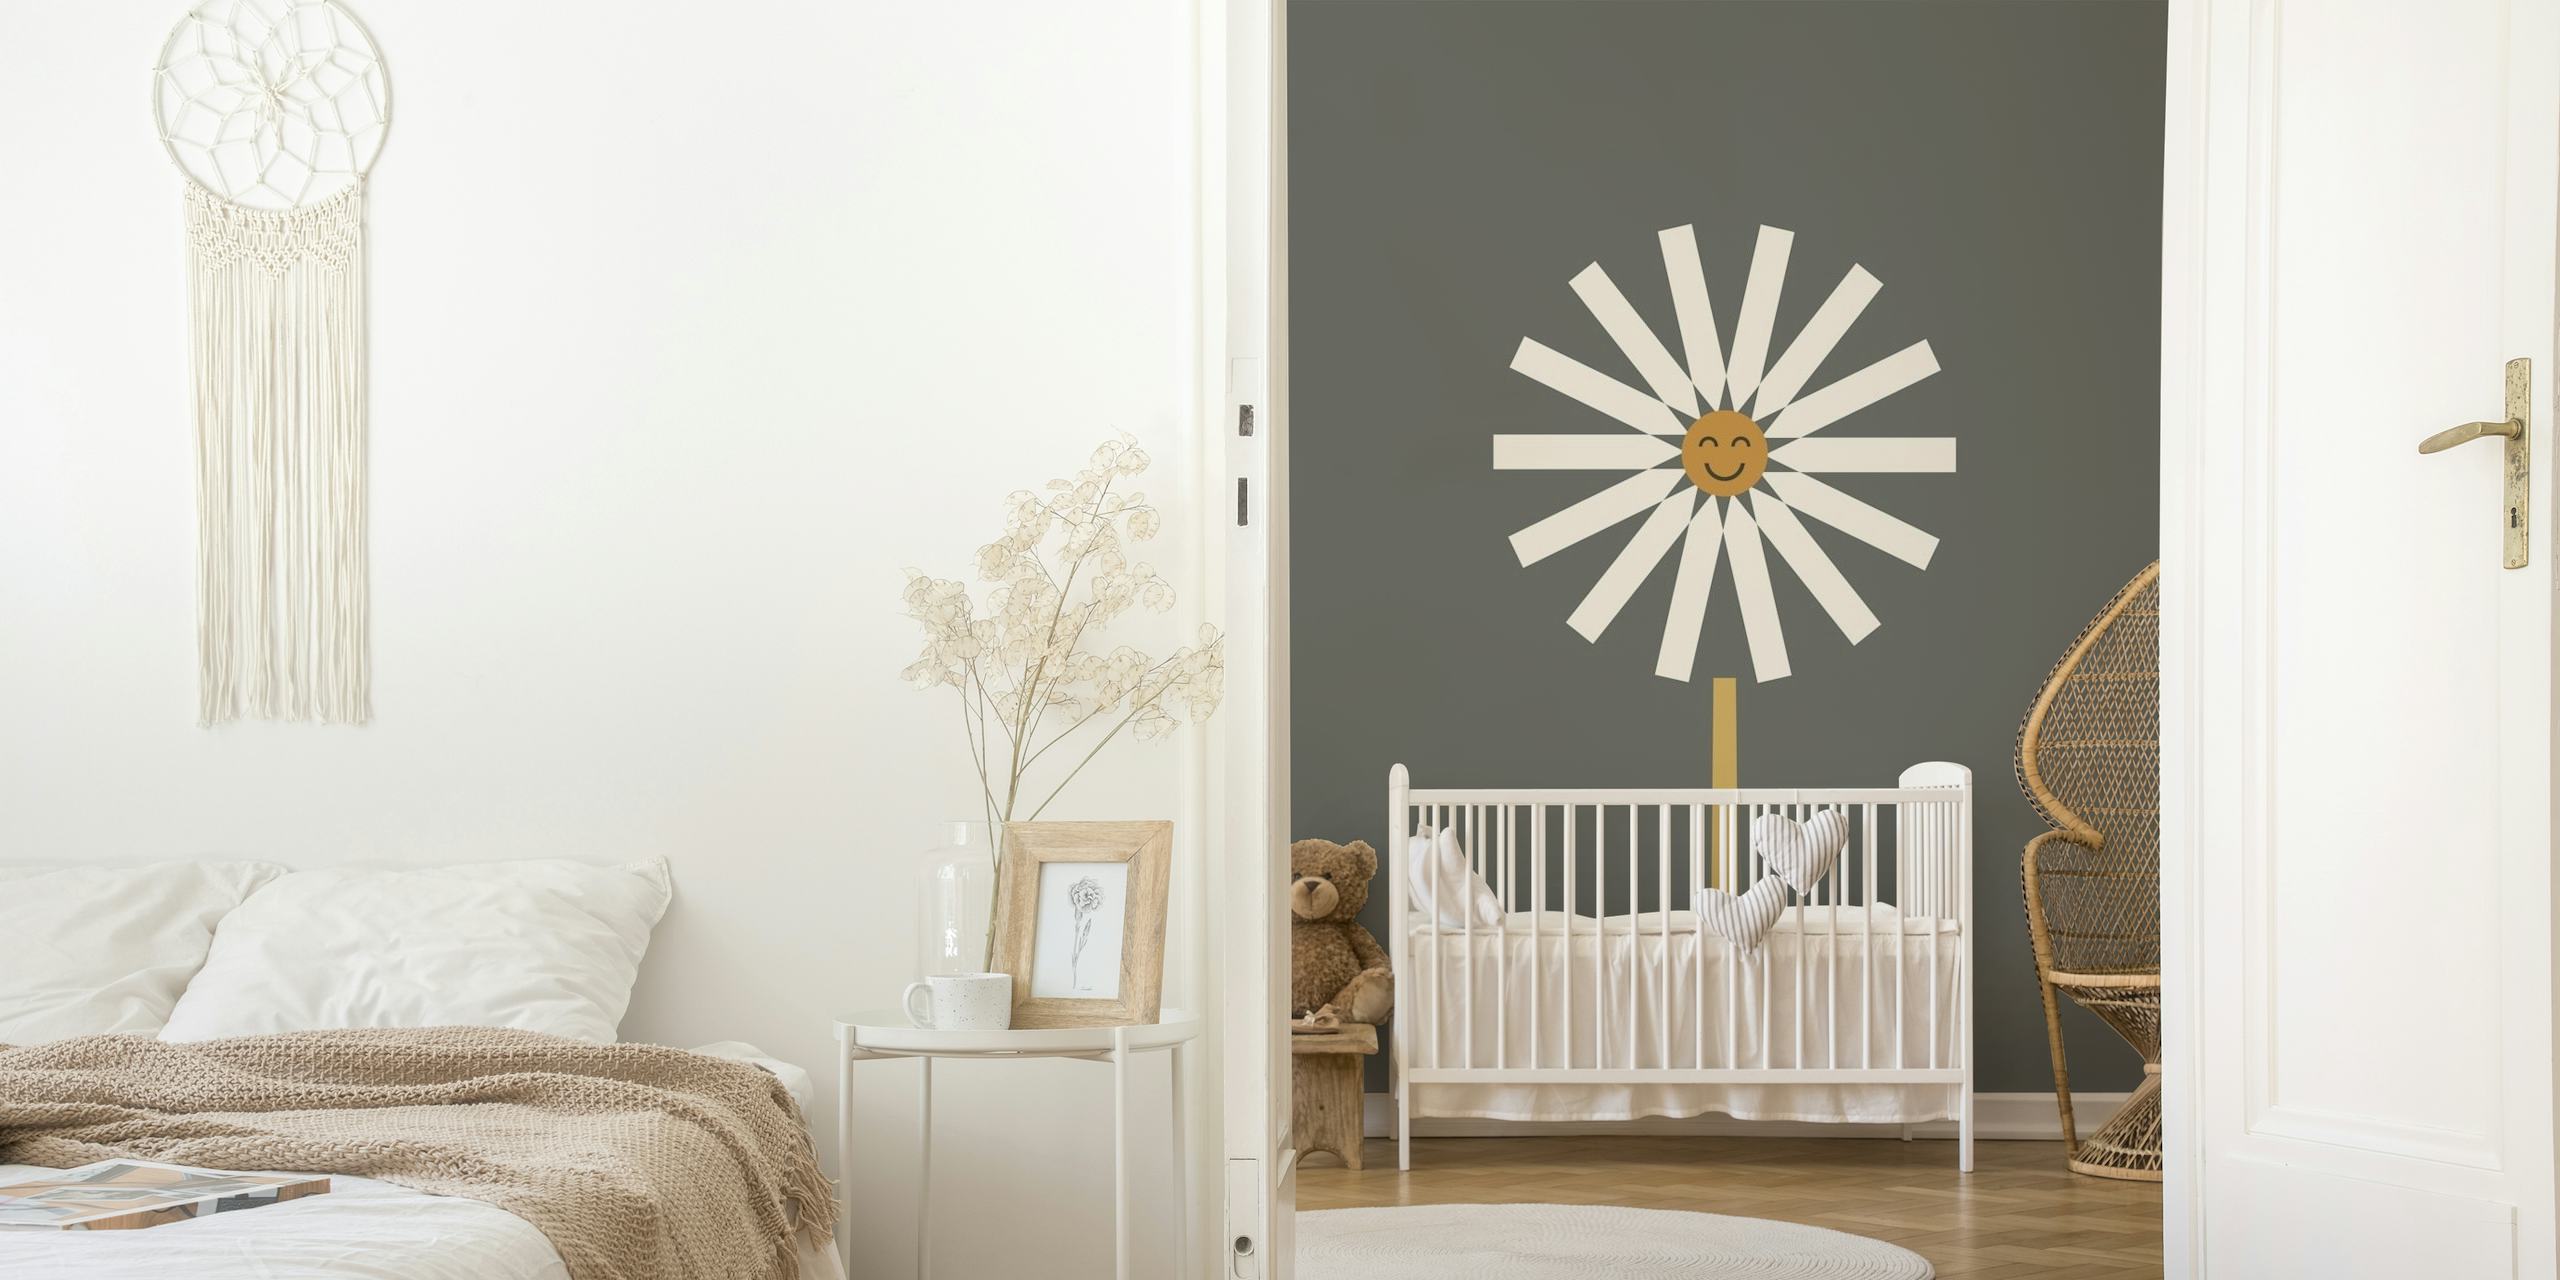 Stylized daisy illustration wall mural on a muted background